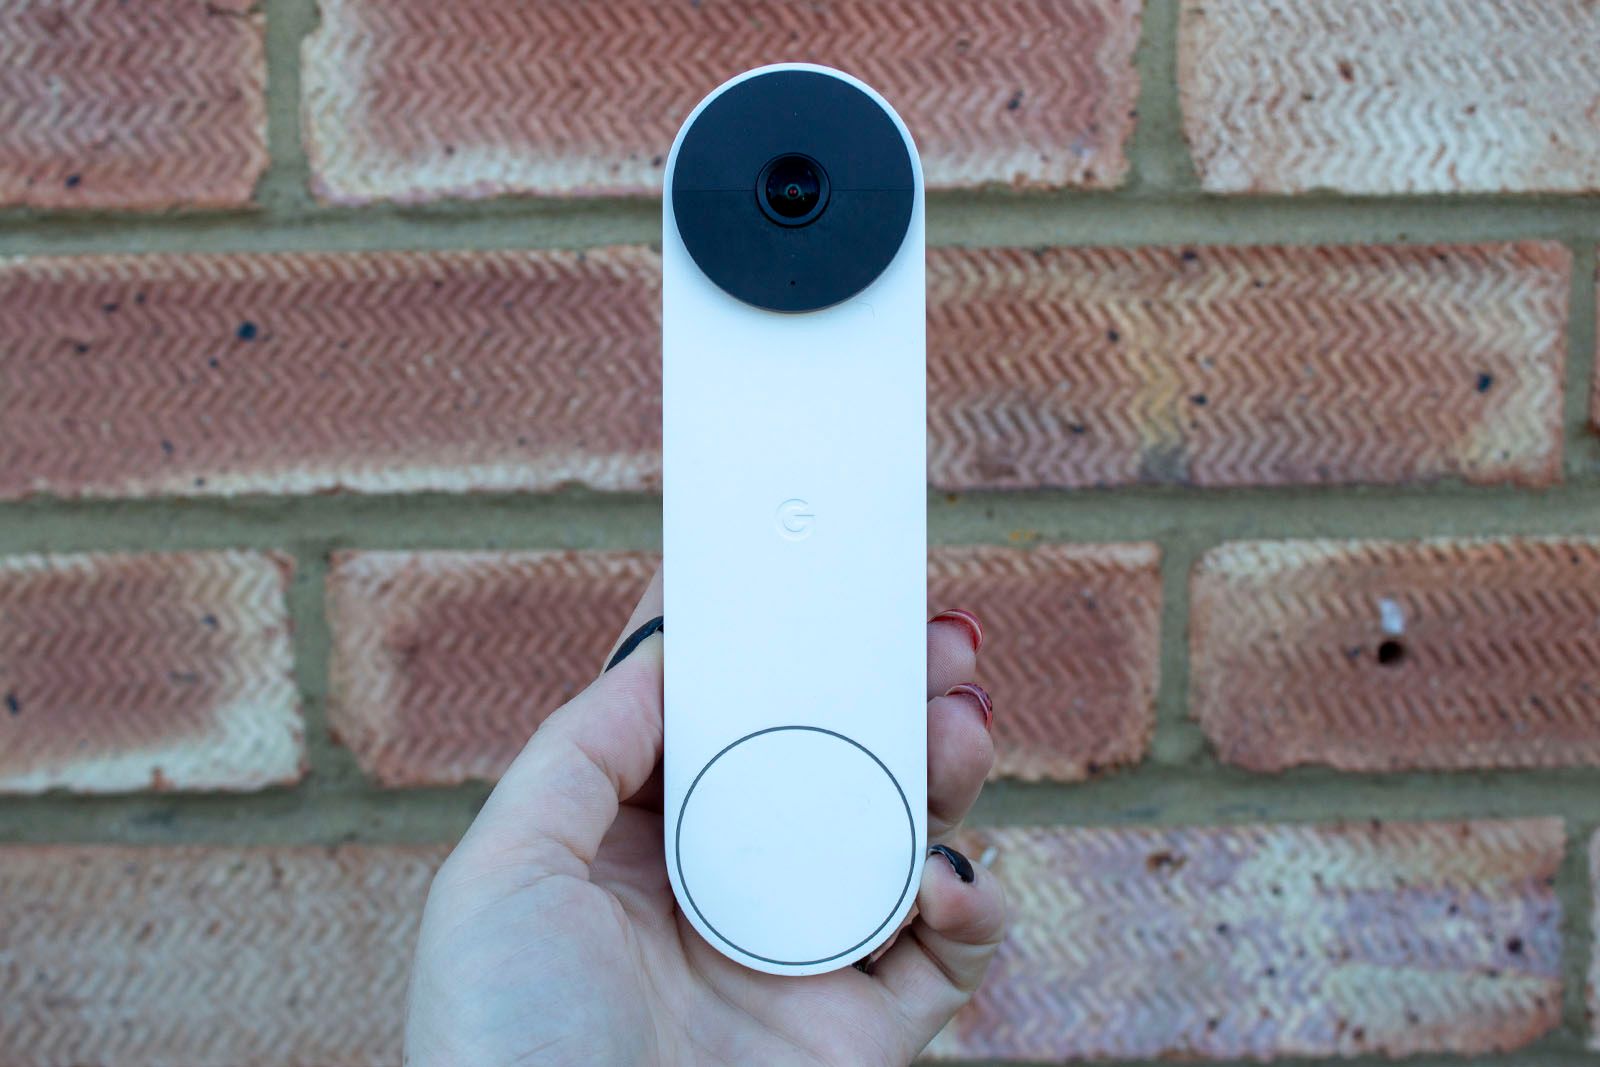 Google Nest Battery Doorbell review: A great Ring competitor photo 9